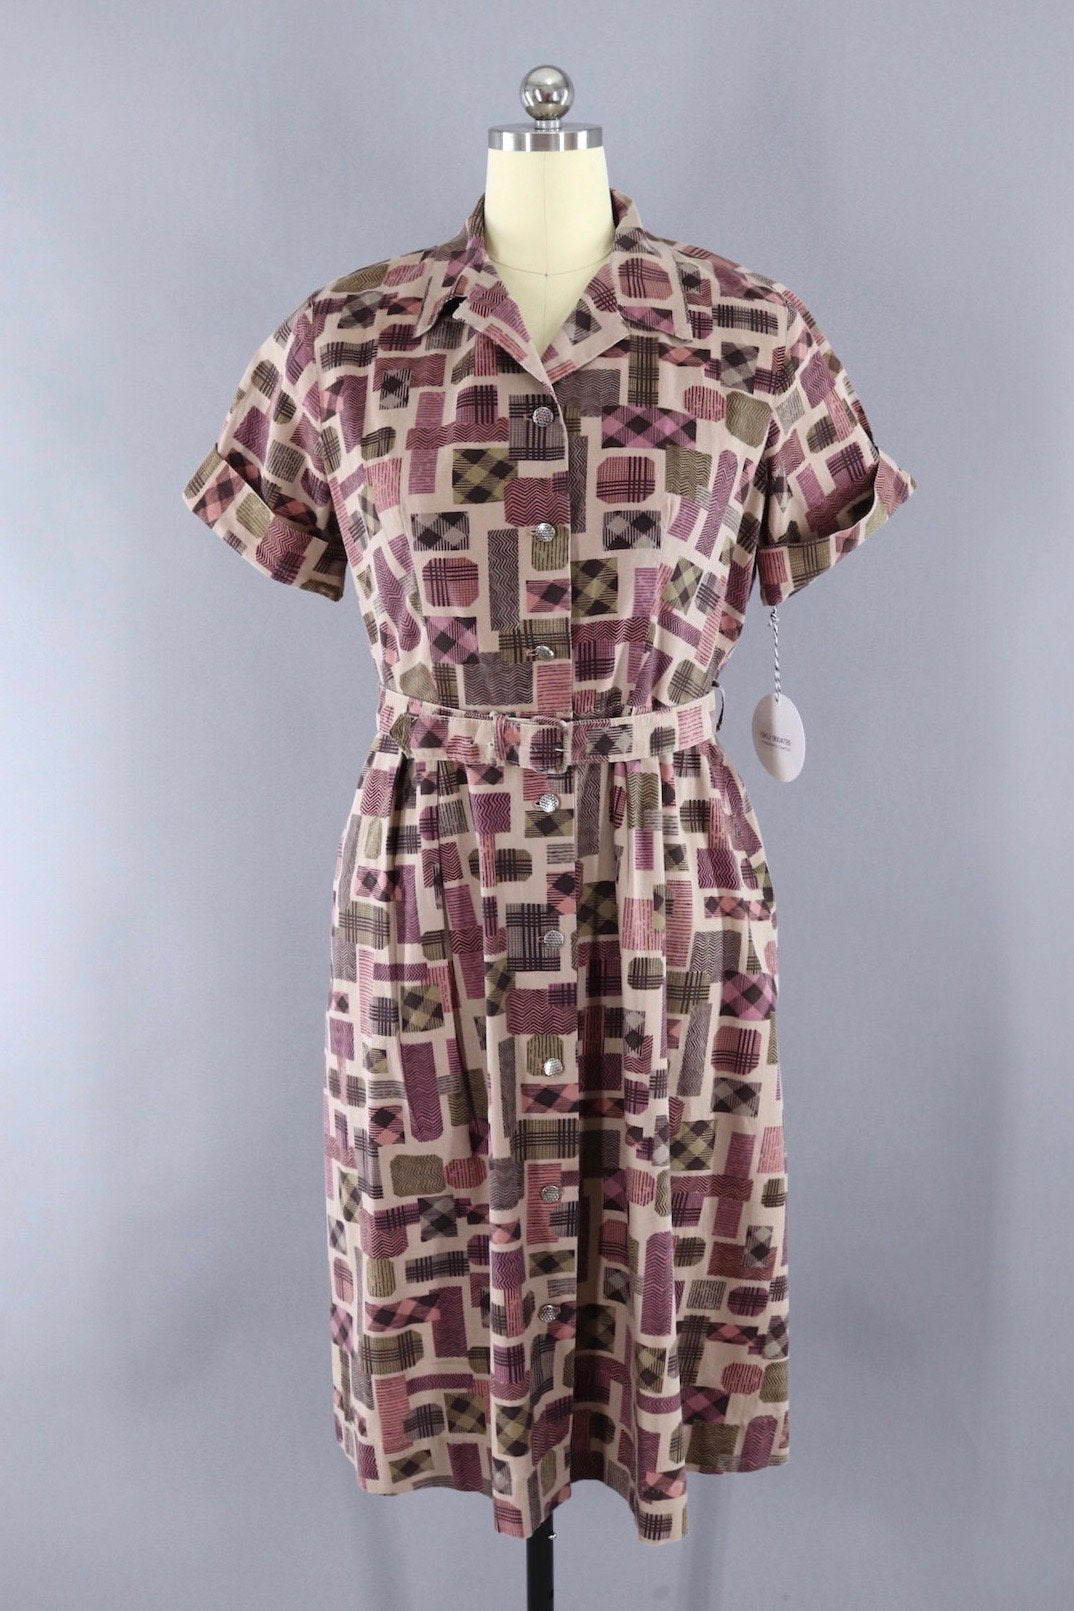 Vintage 1950s Cotton Day Dress / Pink and Tan Geometric Print - ThisBlueBird